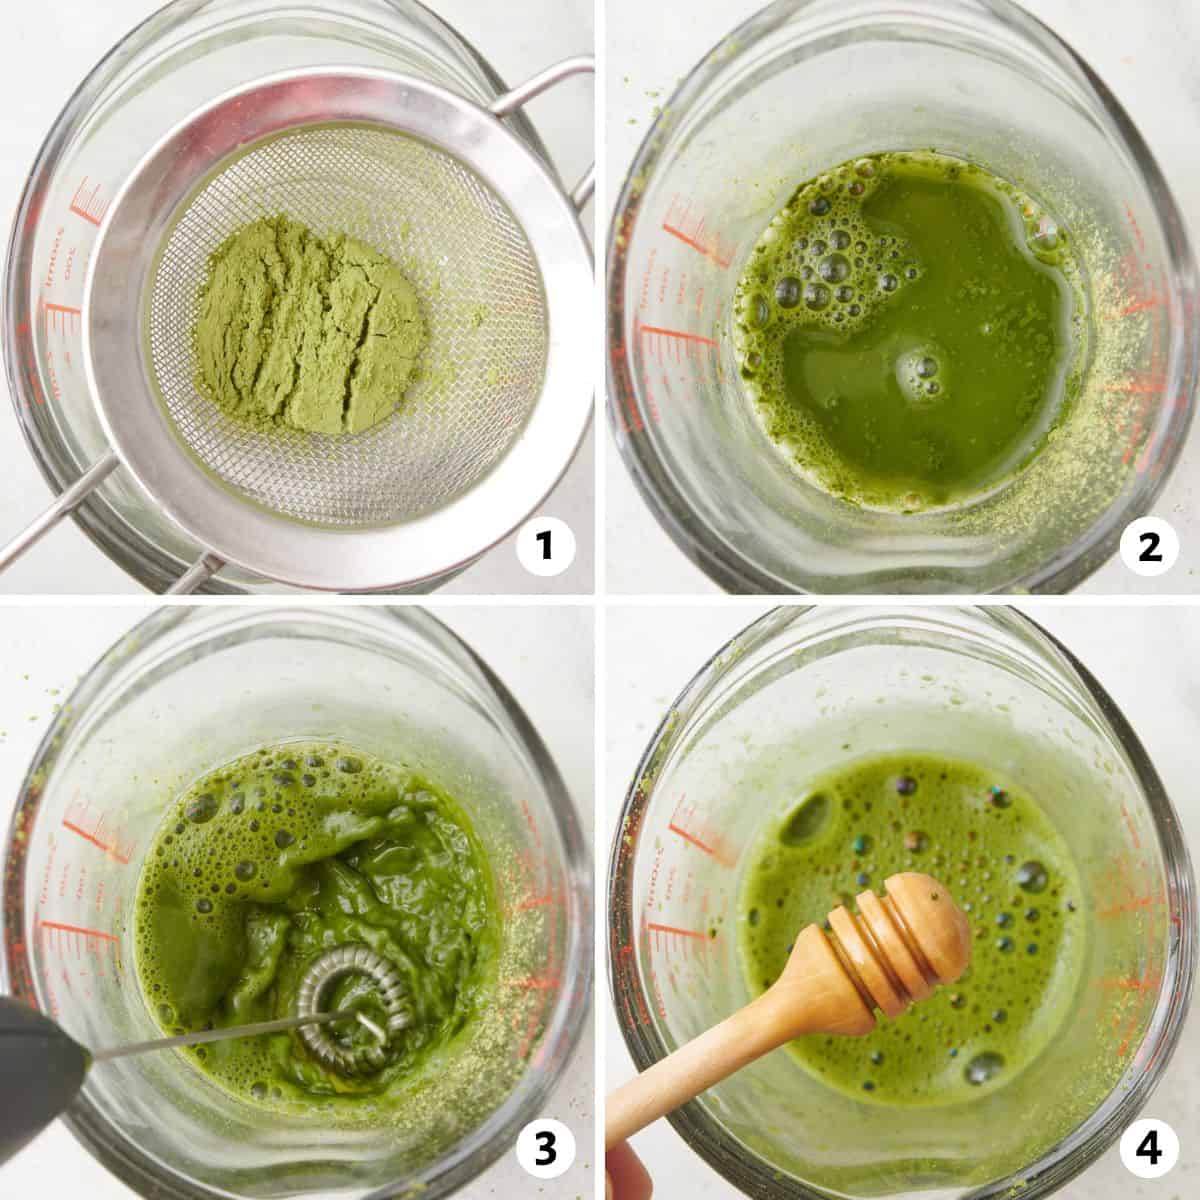 4 image collage making recipe: 1- matcha powder in a small mesh sieve over a measuring cup of hot water, 2- showing water and matcha, 3- milk frother mixing water and powder, and 4- honey being added.